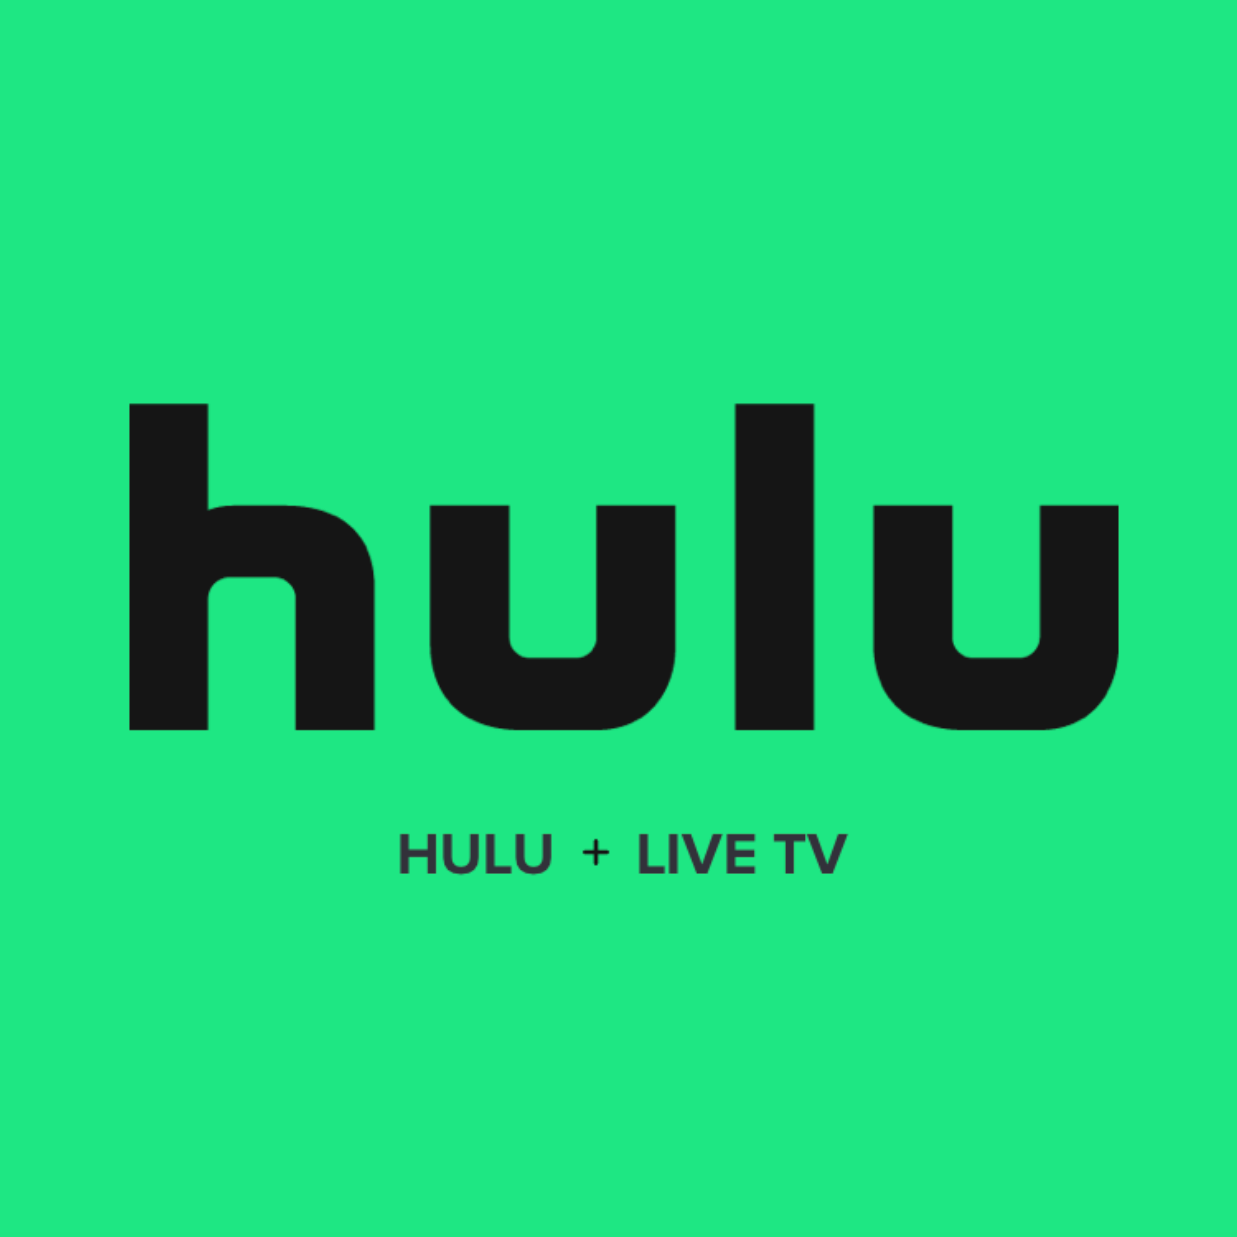 Hulu on X: 90+ live channels. $49.99 per month for 3 mos. Lots of